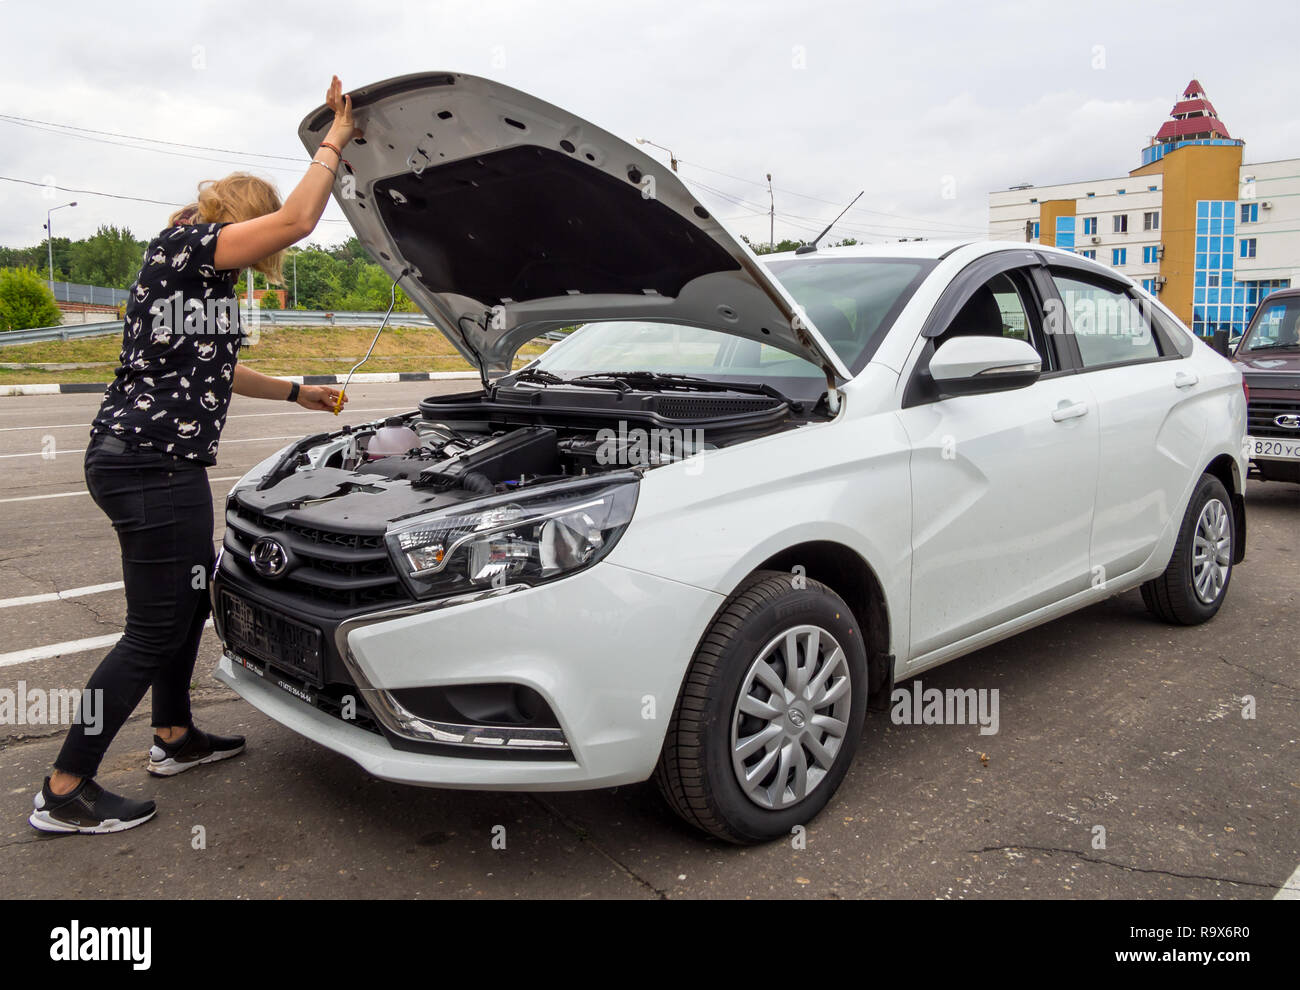 Voronezh, Russia - July 17, 2018: The girl opens the hood of a new car Lada  Vesta Stock Photo - Alamy